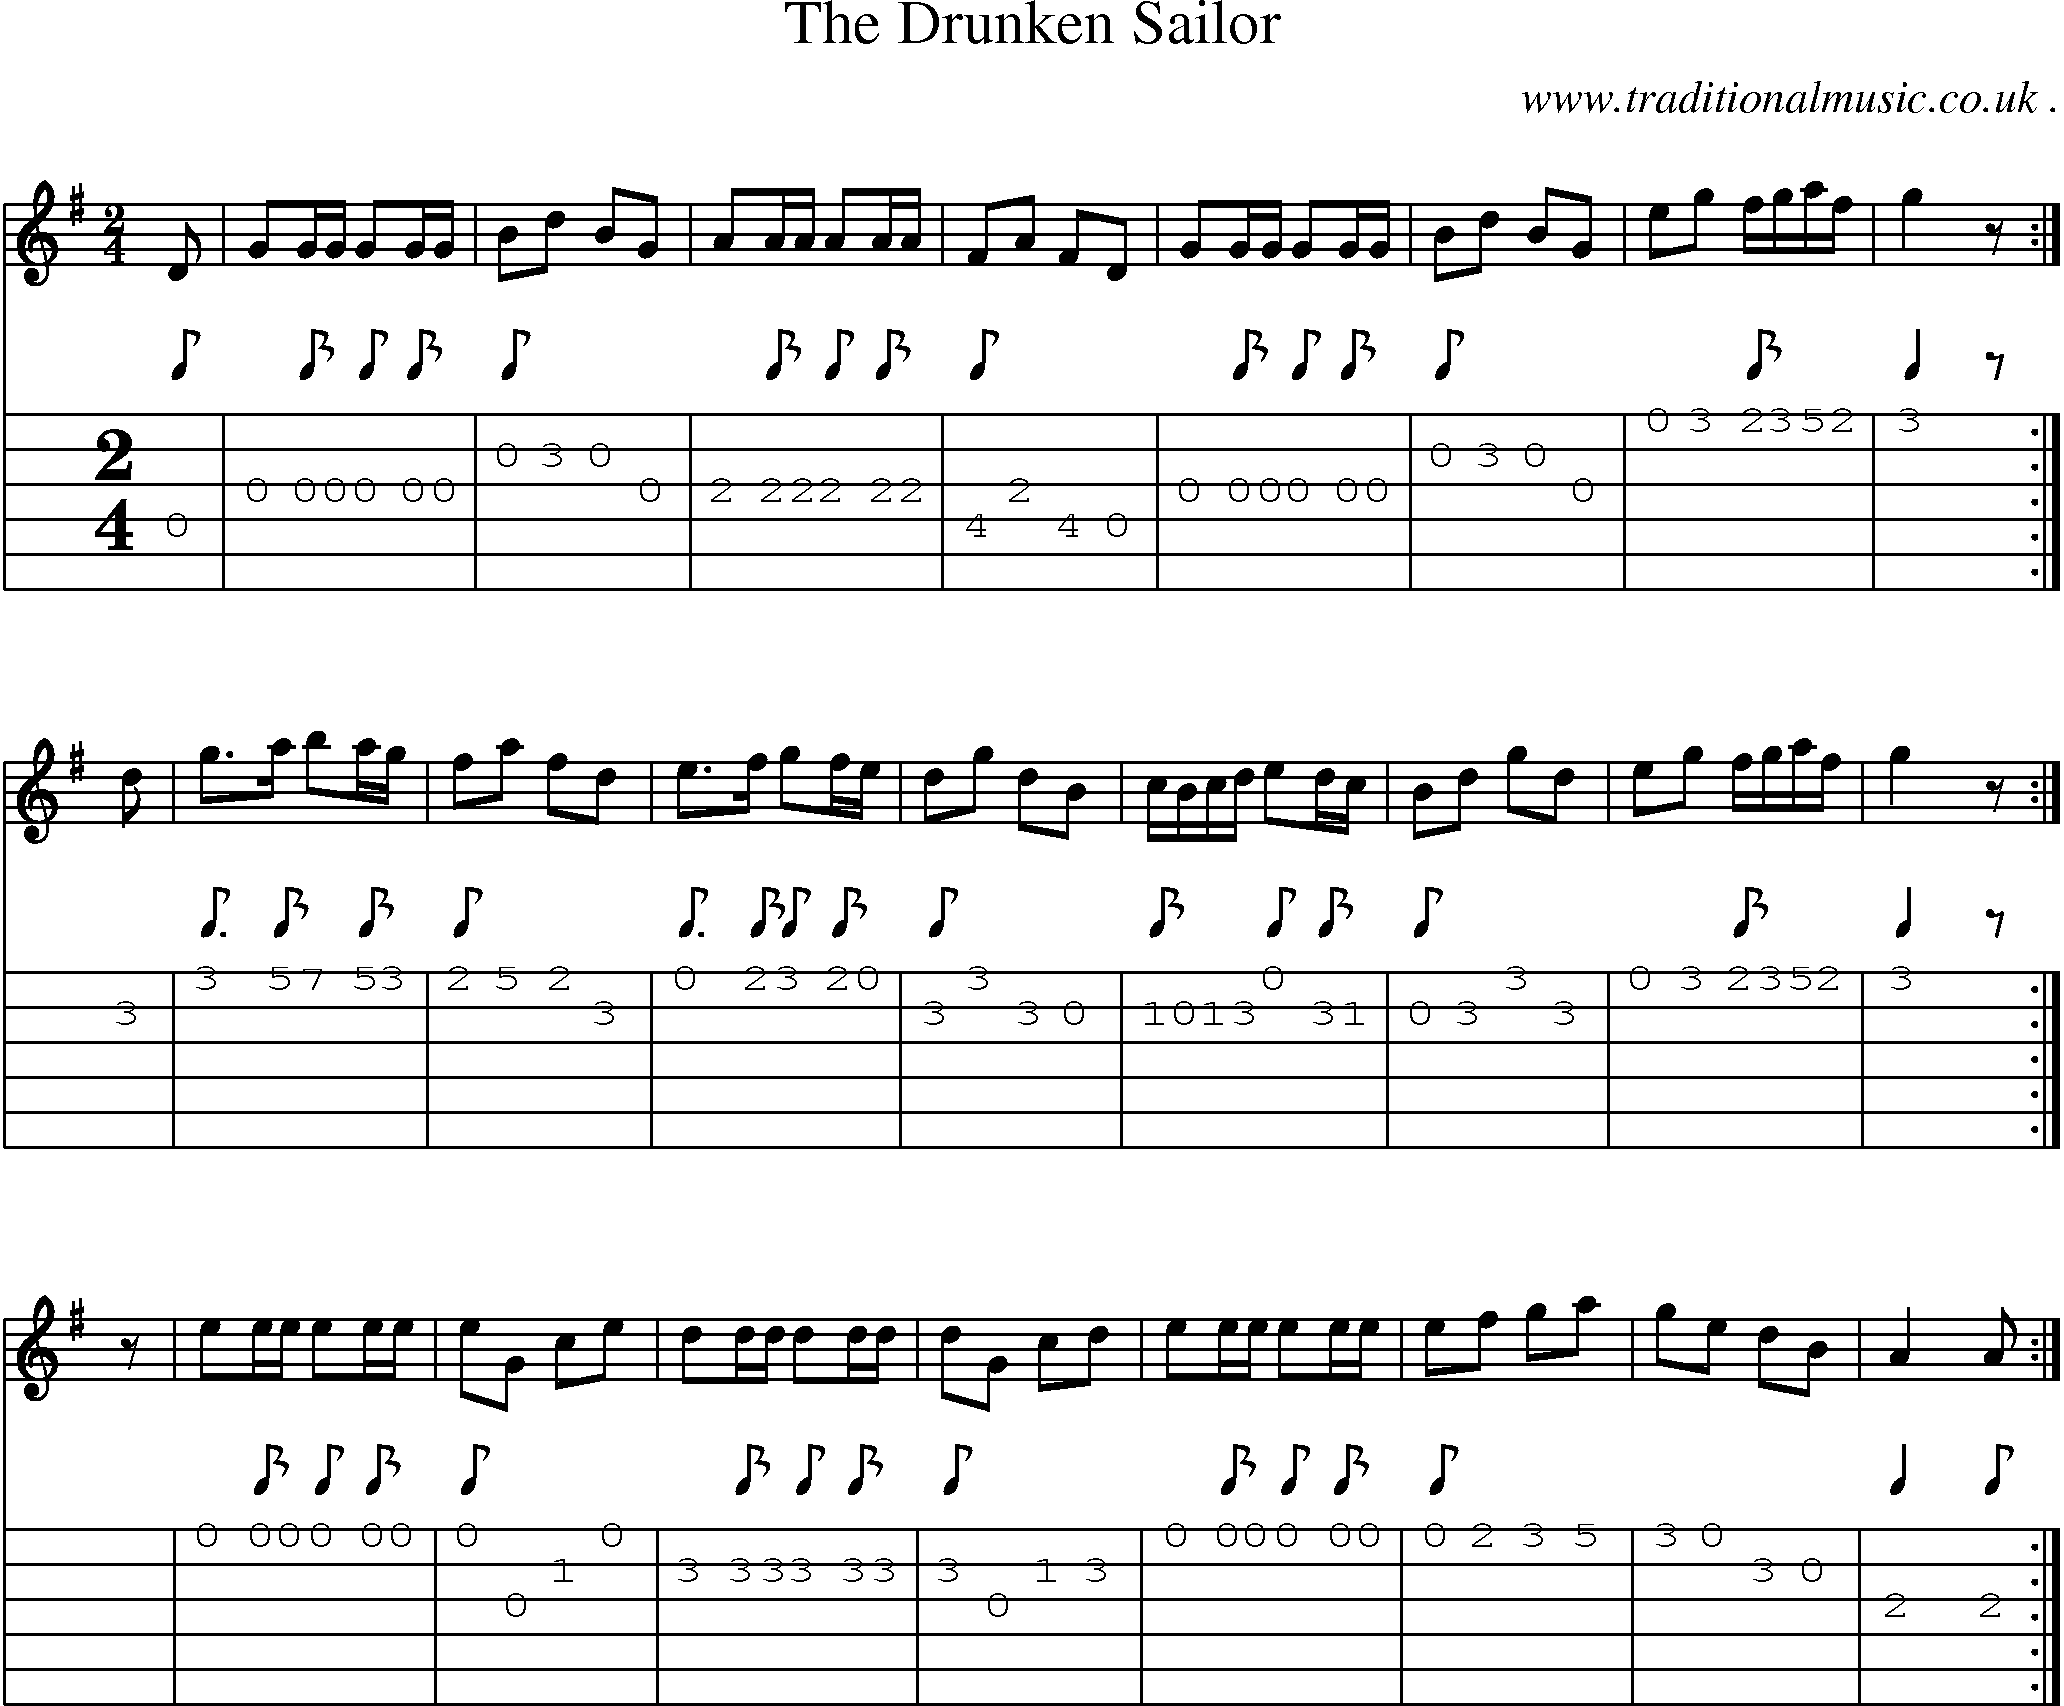 Music Score and Guitar Tabs for The Drunken Sailor